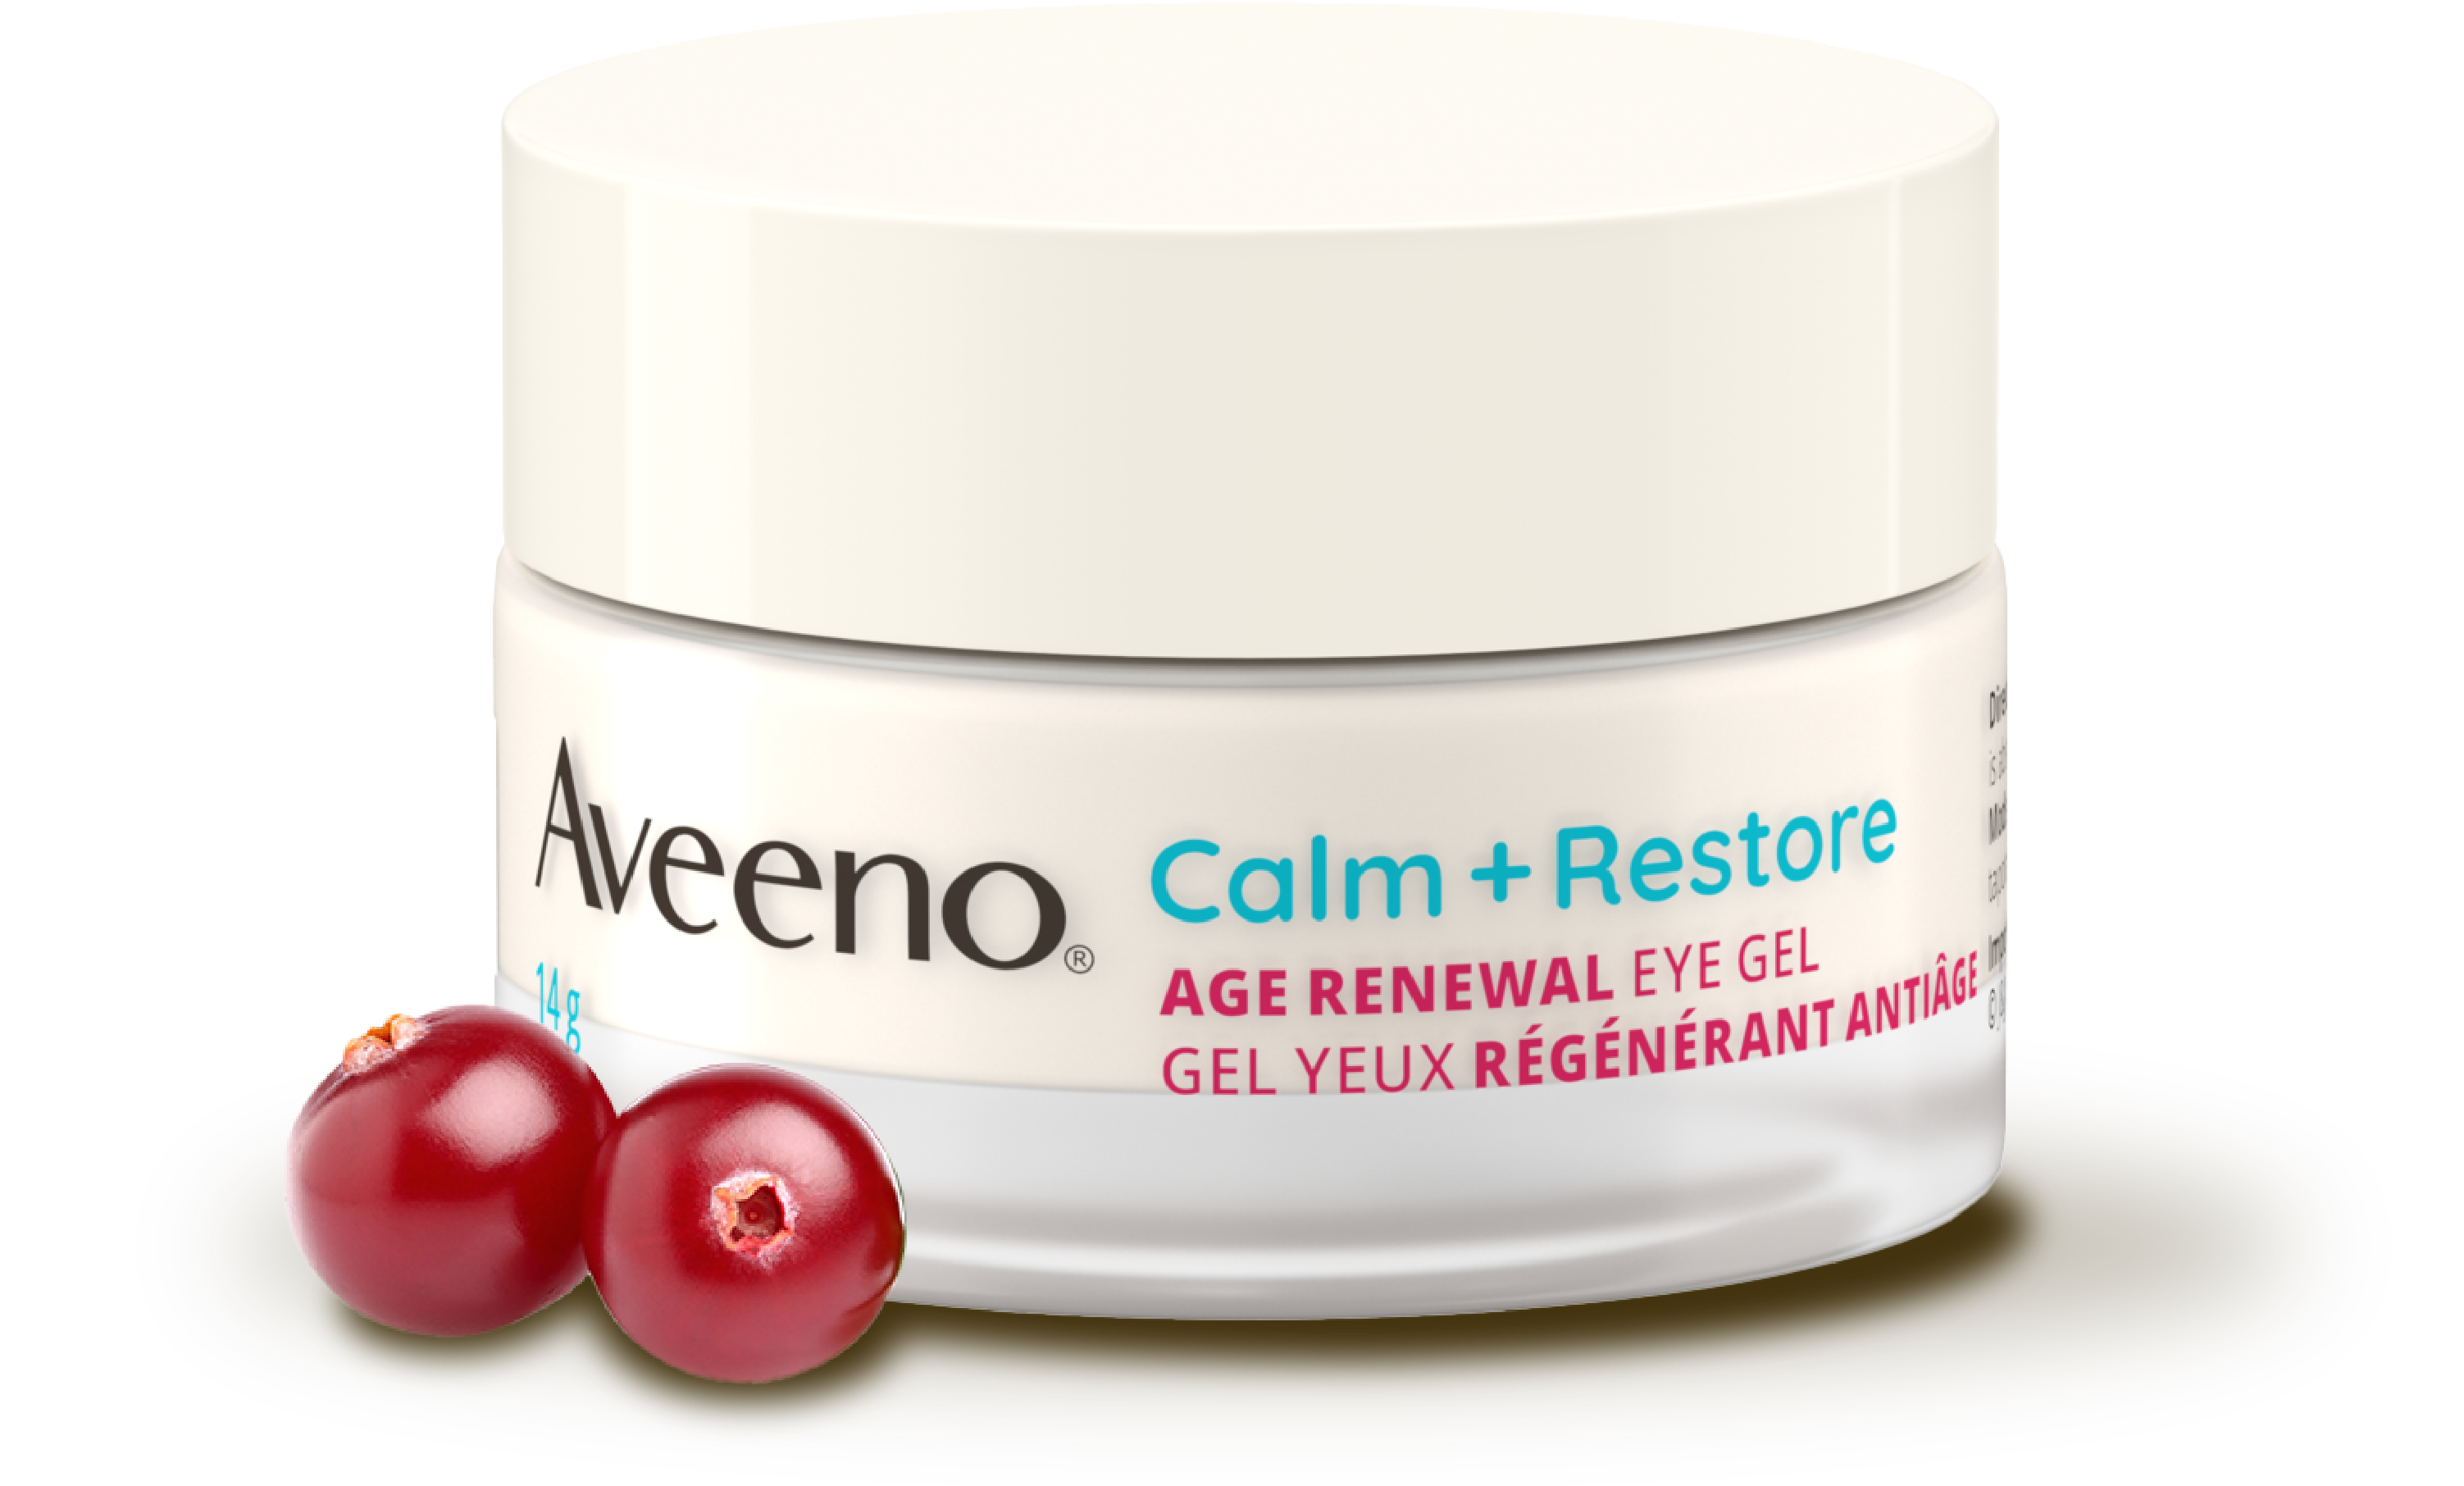 Aveeno Age Renewal Eye Gel: Revitalize your eyes with this timeless beauty solution. Visibly reduce fine lines and wrinkles while soothing and nourishing the delicate eye area.